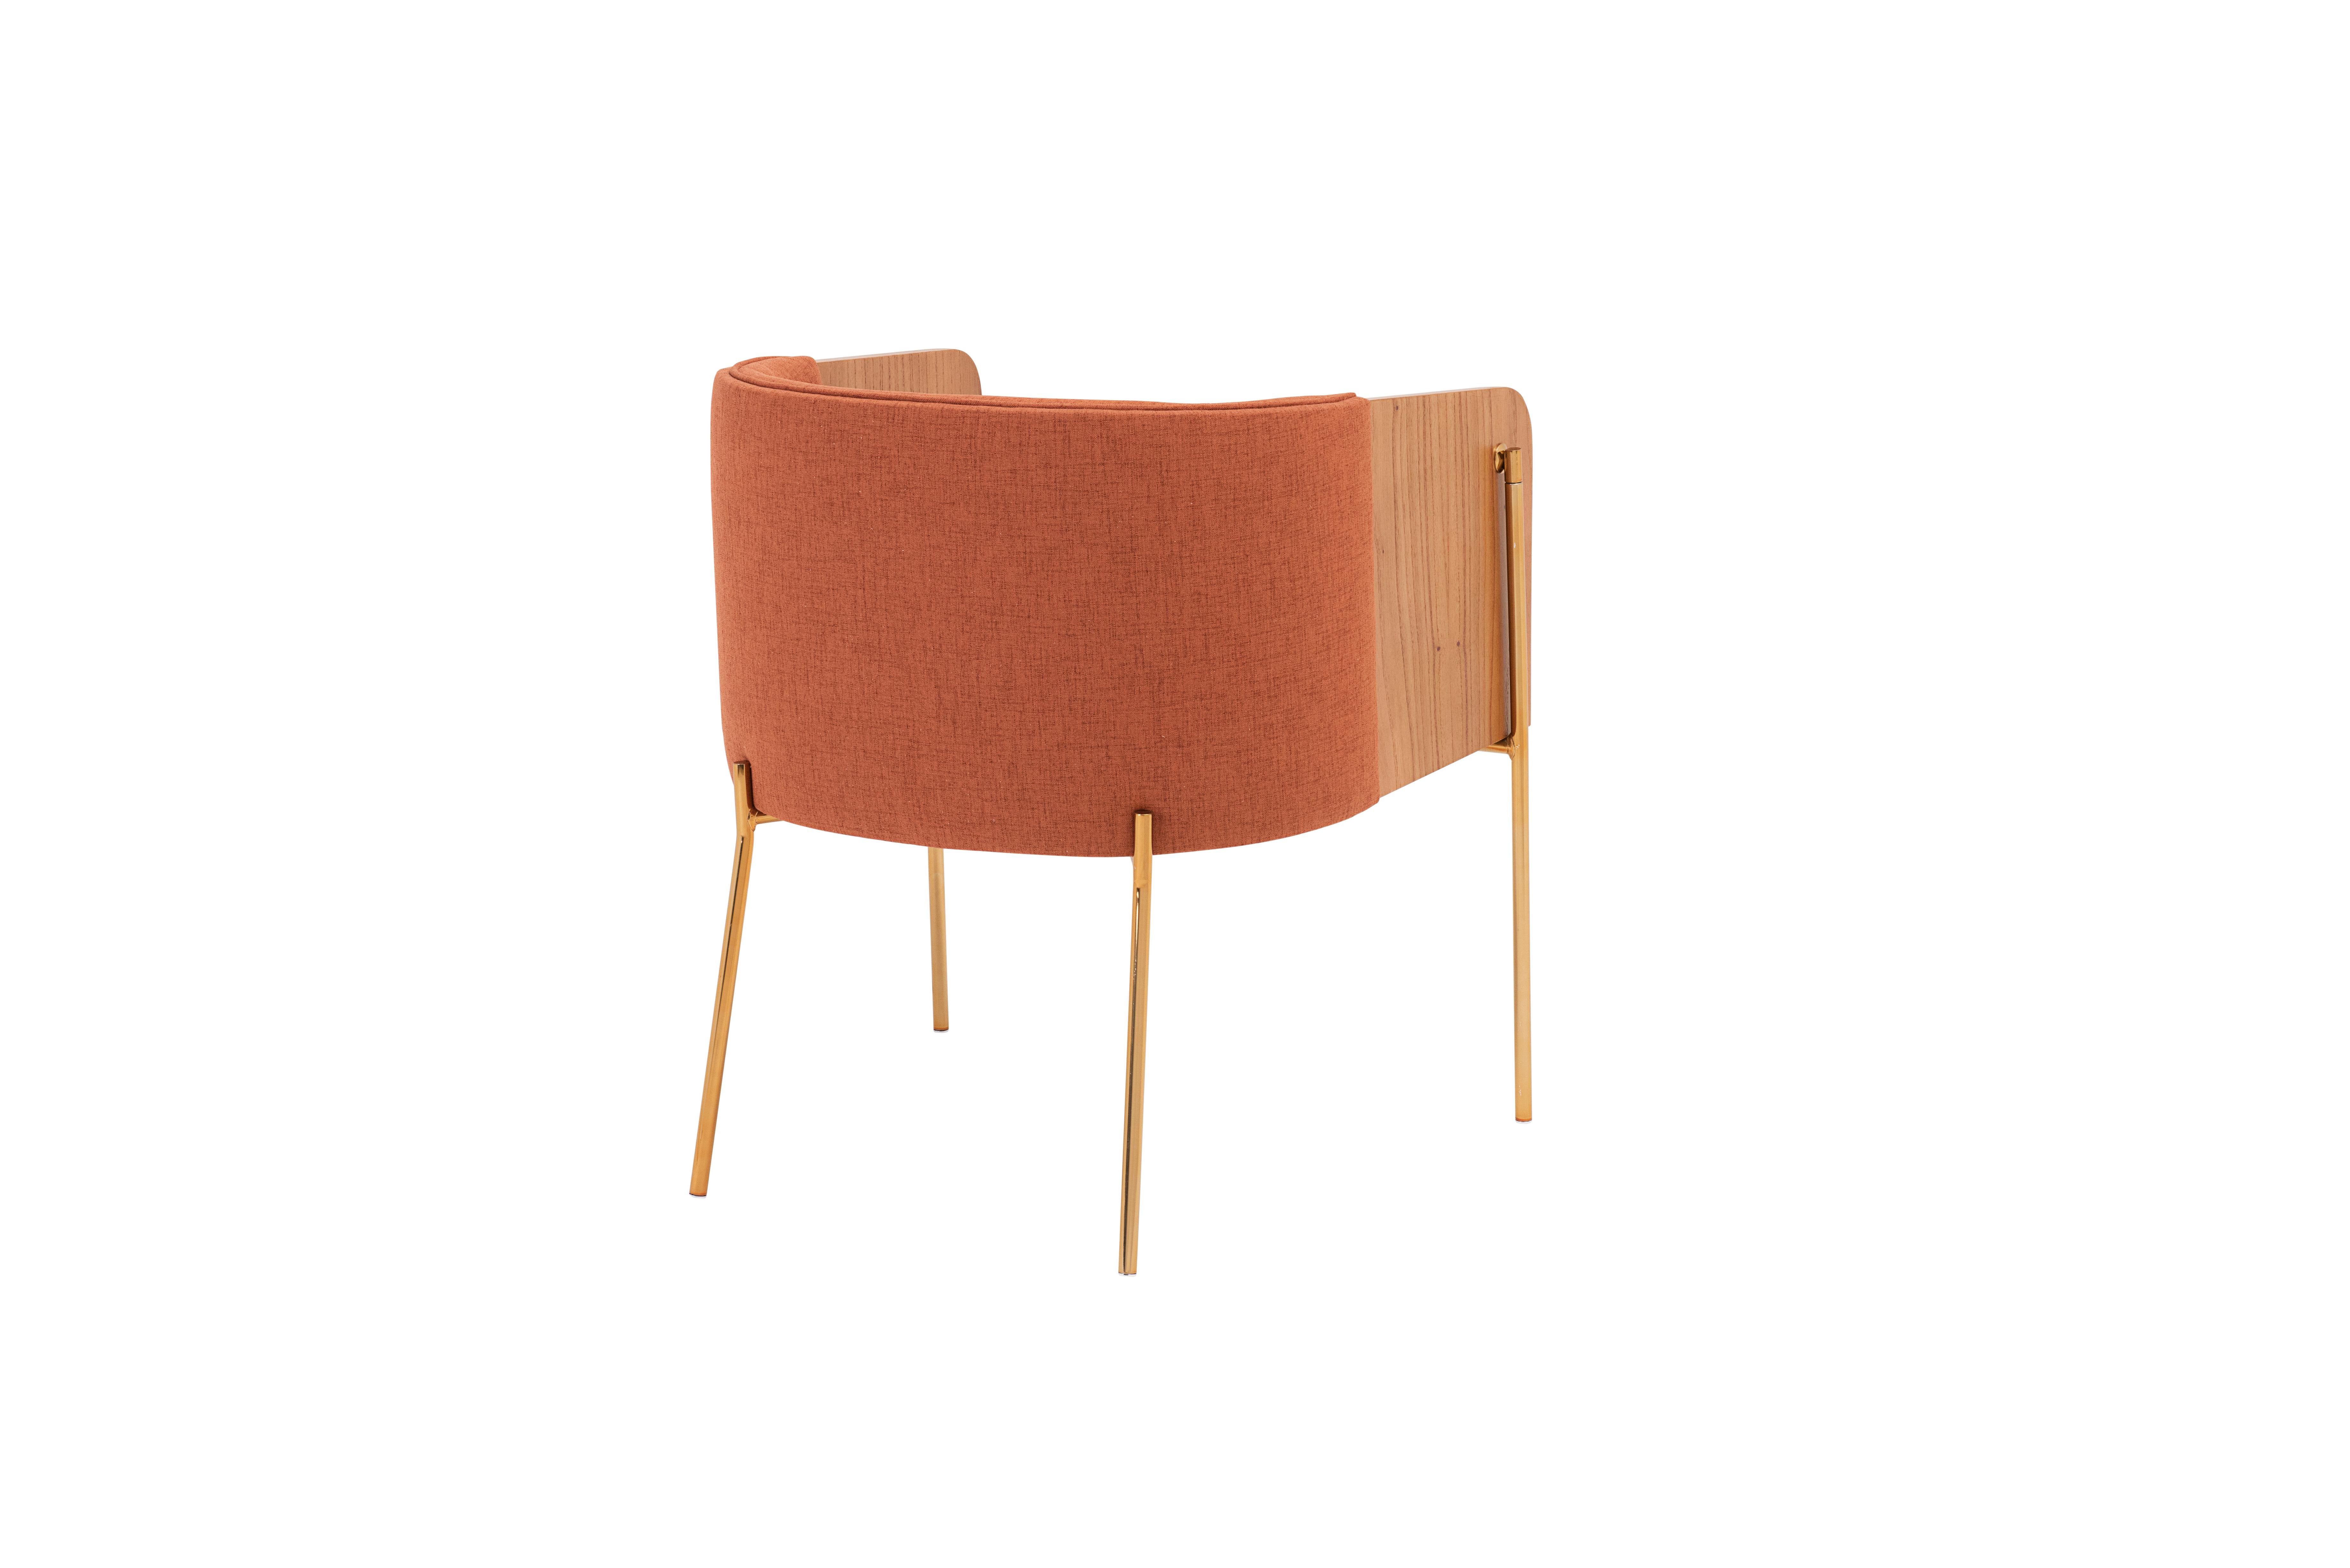 The punto armchair has an elegant and versatile design. Easy to match, transitions into many interior decor styles.
Its finishes are impeccable, with a harmonious mix of  high quality materials: Curve multilaminate wooden backrest, coated with